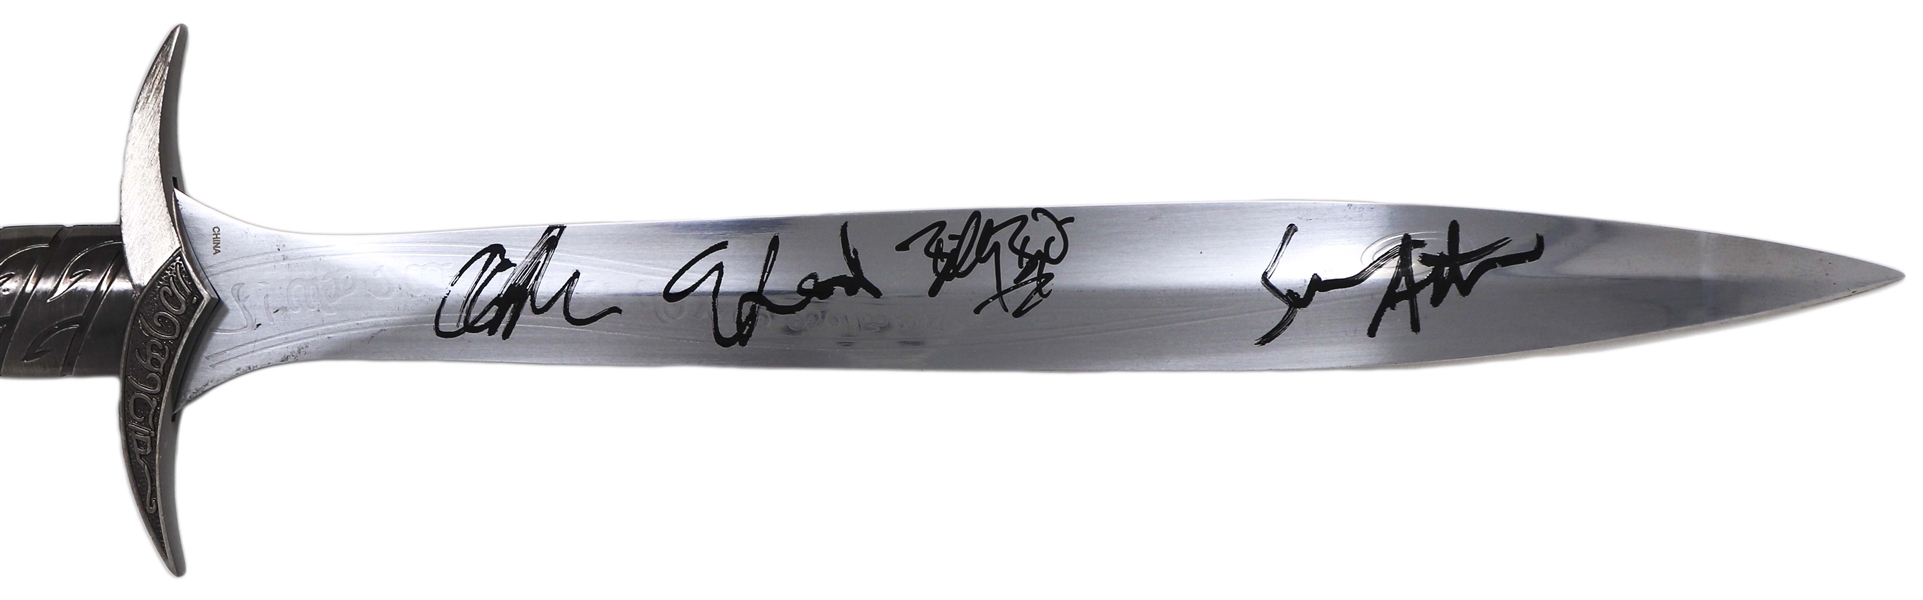 ''Lord of the Rings'' Cast-Signed Sword -- Signed by Elijah Wood, Sean Astin, Billy Boyd and Dominic Monaghan -- With Beckett COA